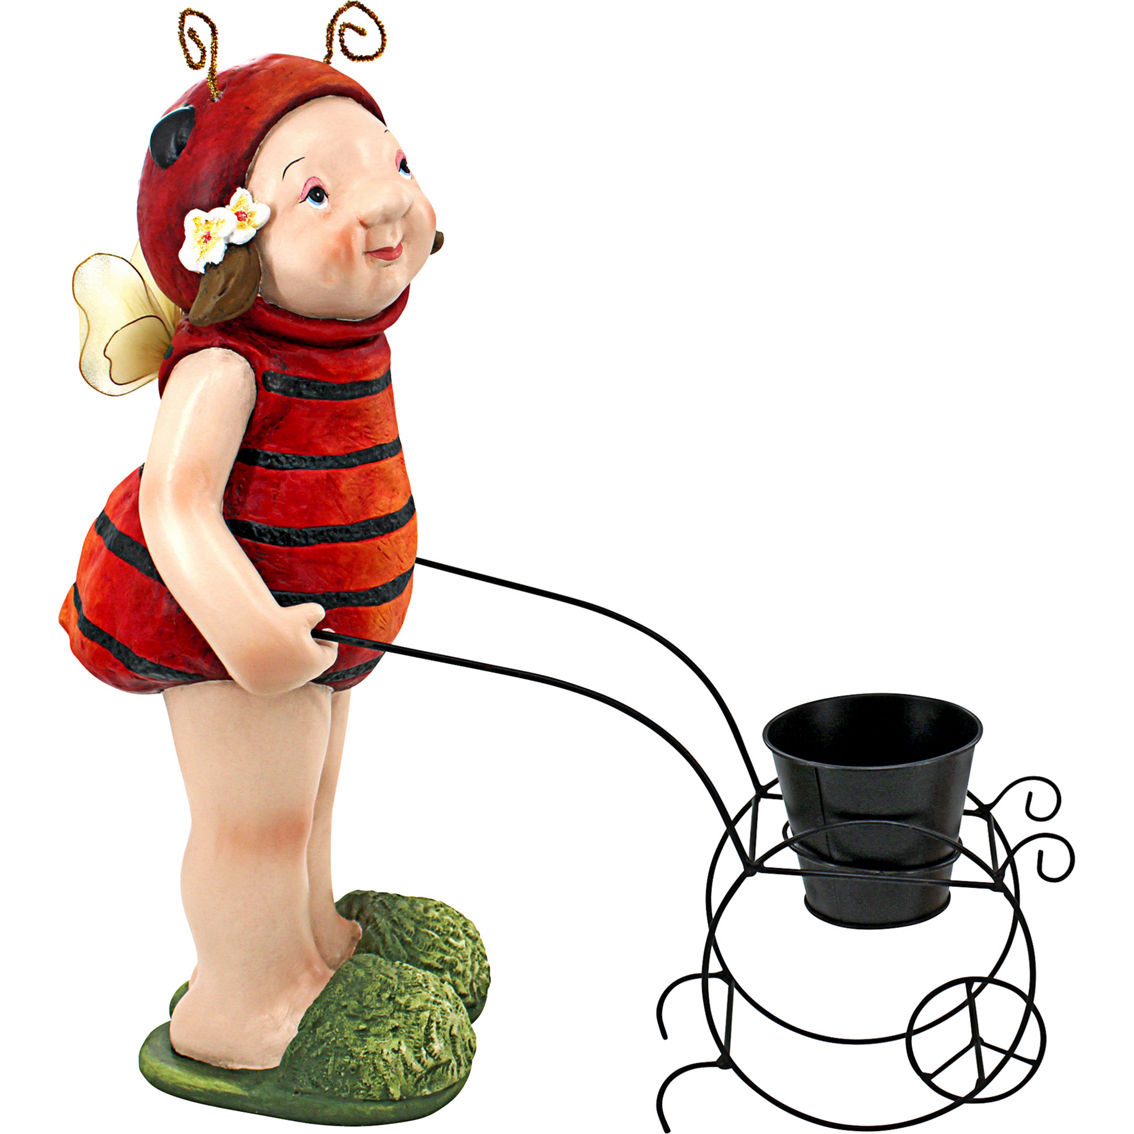 Design Toscano Polly the Lady Bug Fairy Statue - Image 7 of 8